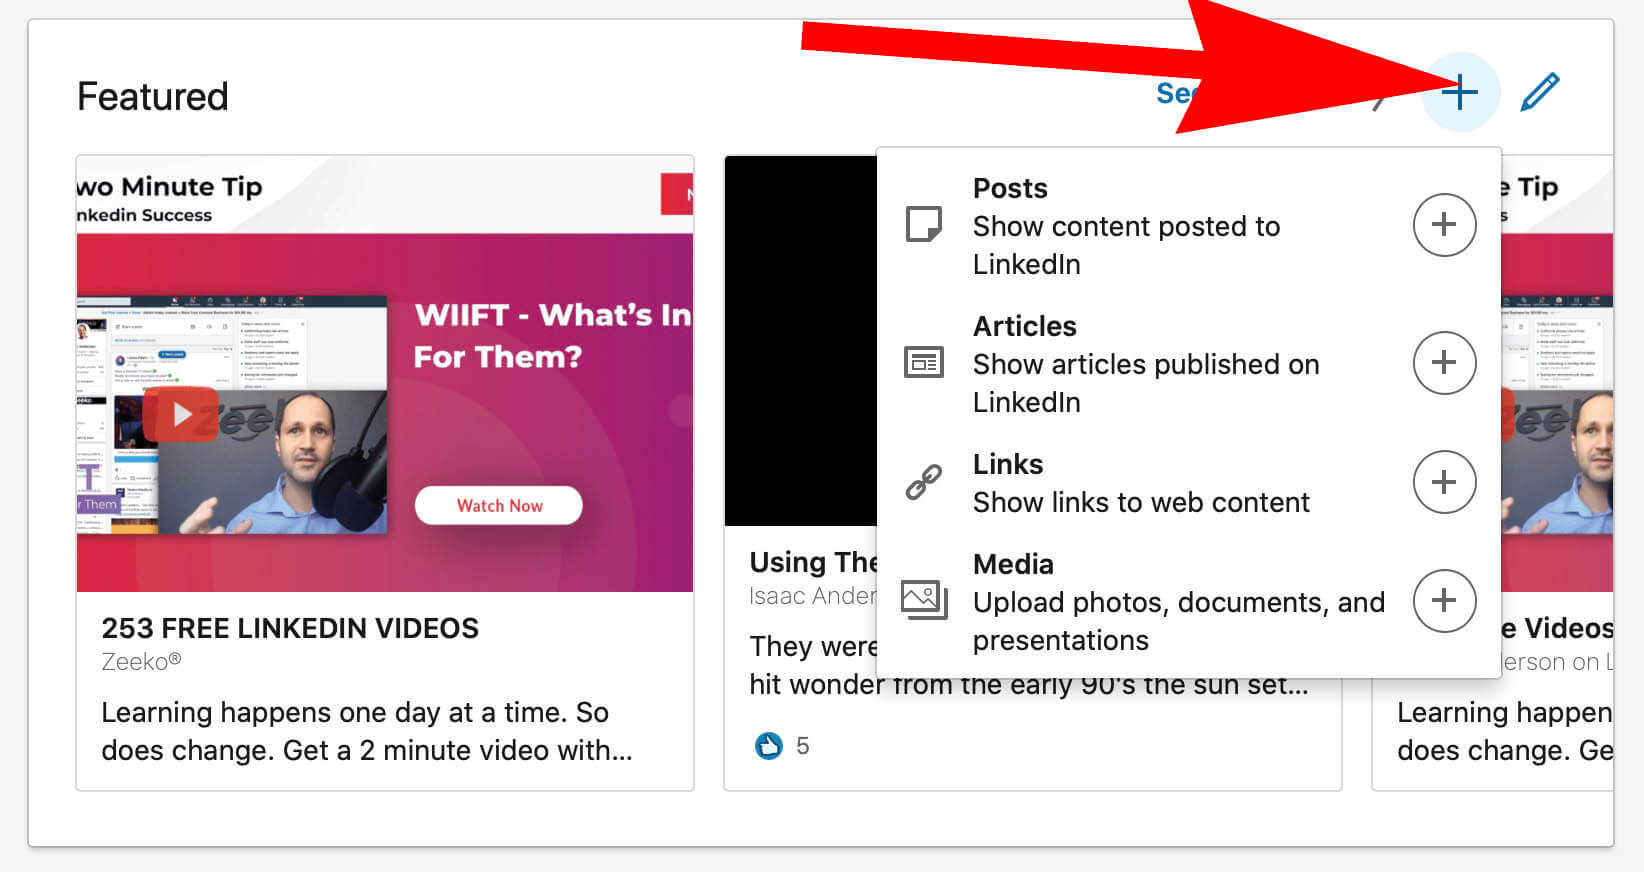 How To Add Featured Content and Images To a Linked Profile - adding featured content options